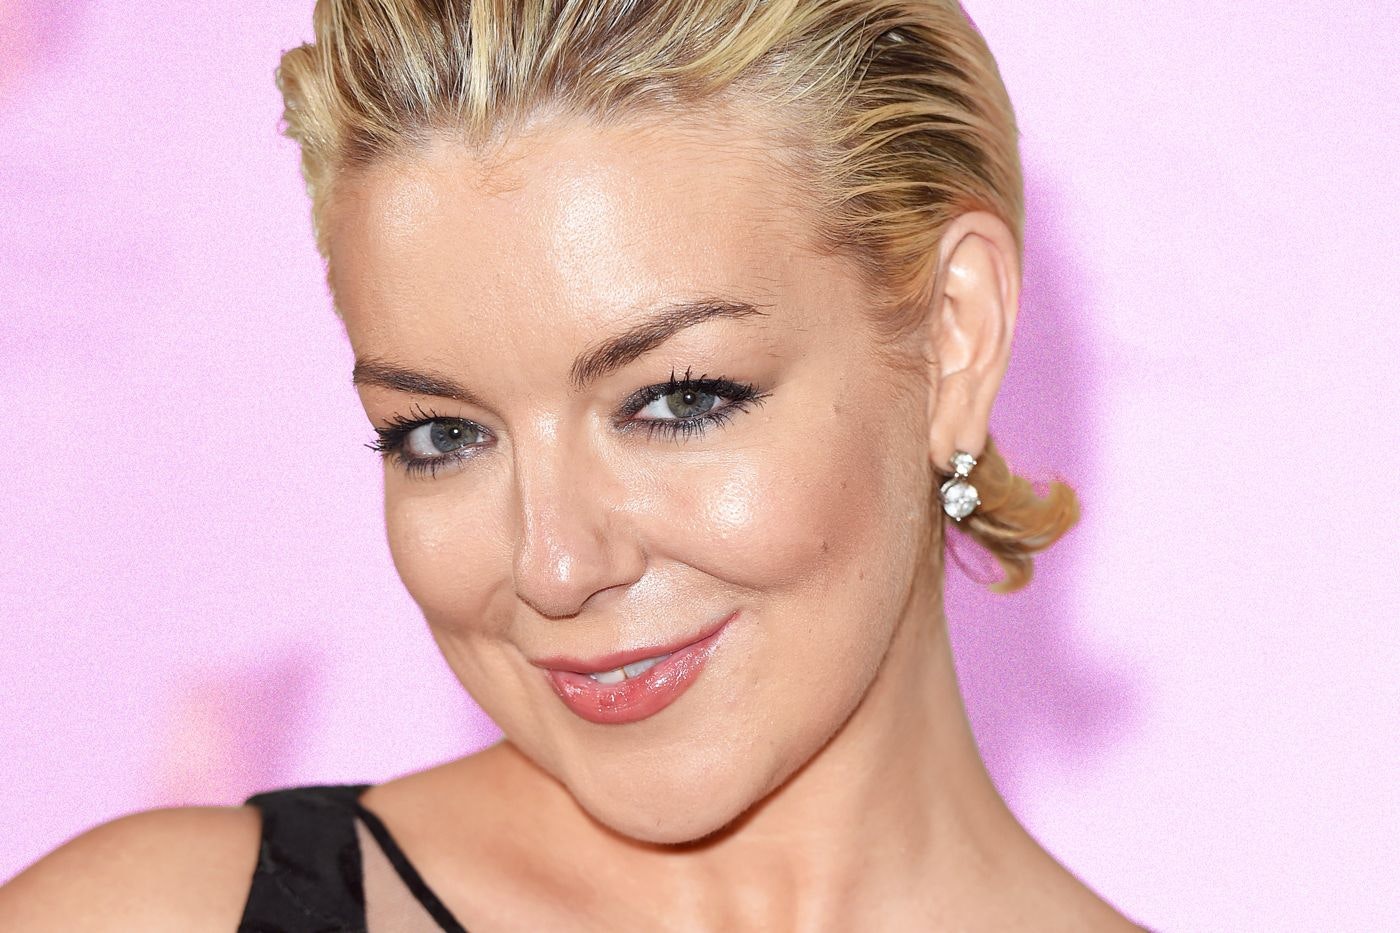 Sheridan Smith’s Adult Material is set to become your new TV obsession